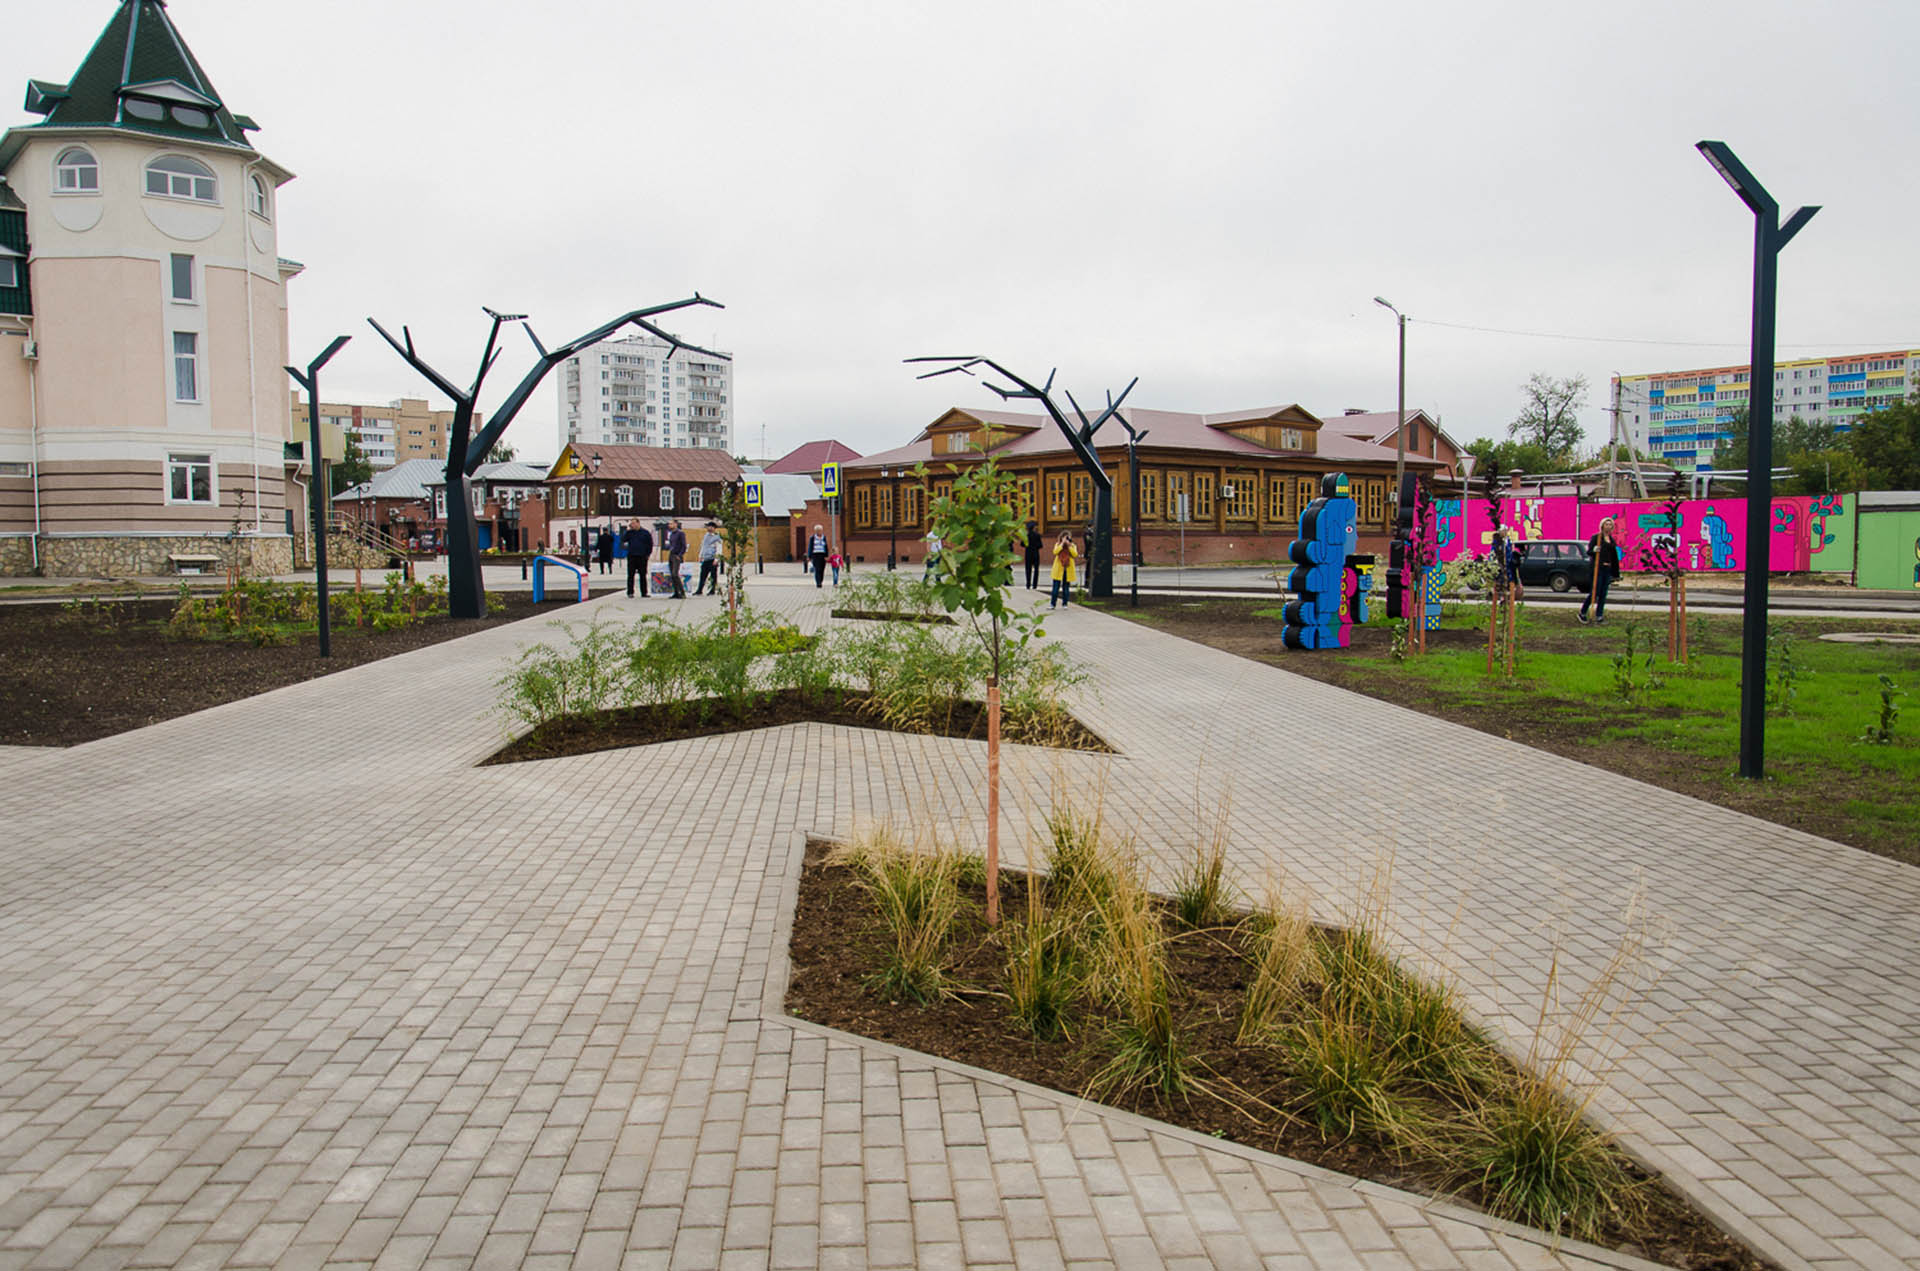 <p>The most prominent landmark in the area is the Tawba Mosque, and the design concept for the embankment landscaping includes connections to the Tukay Public Garden in front of the mosque, creating a continuous public recreational area.&nbsp;</p>